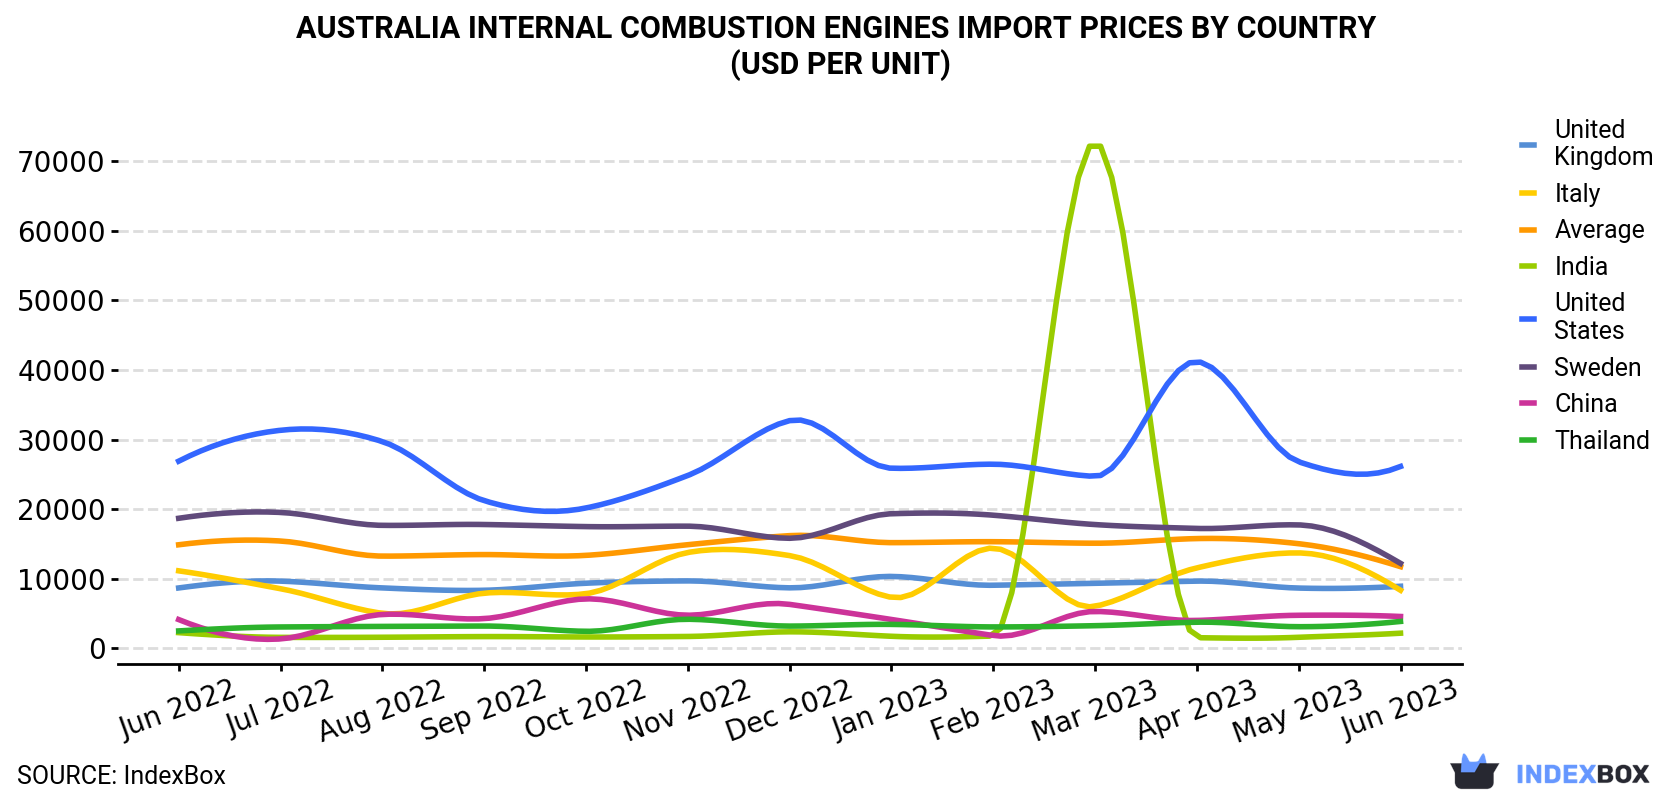 Australia Internal Combustion Engines Import Prices By Country (USD Per Unit)